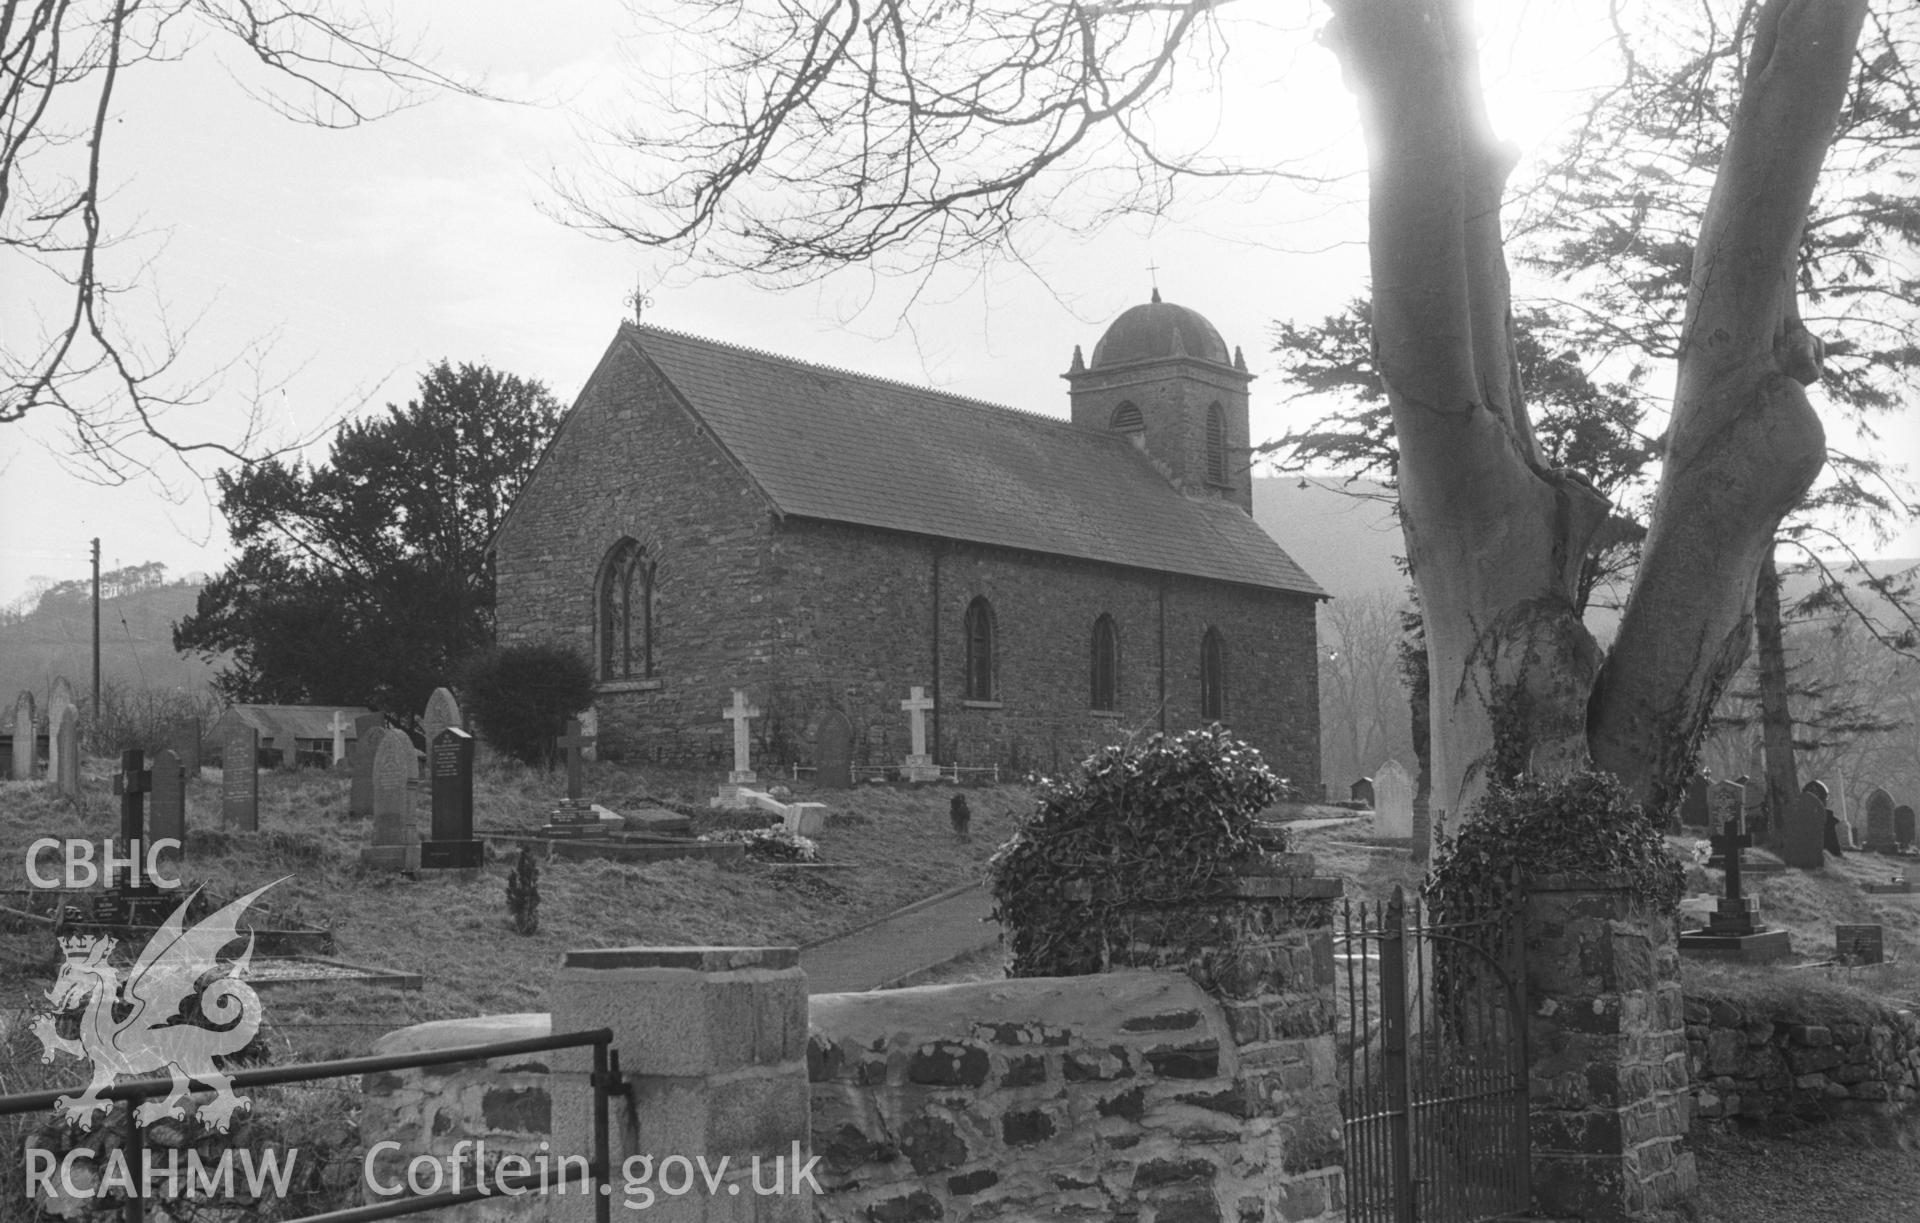 Black and White photograph showing St Non's church from the road, Llanerchaeron. Photographed by Arthur Chater in April 1963 from Grid Reference SN 476 604, looking south west.